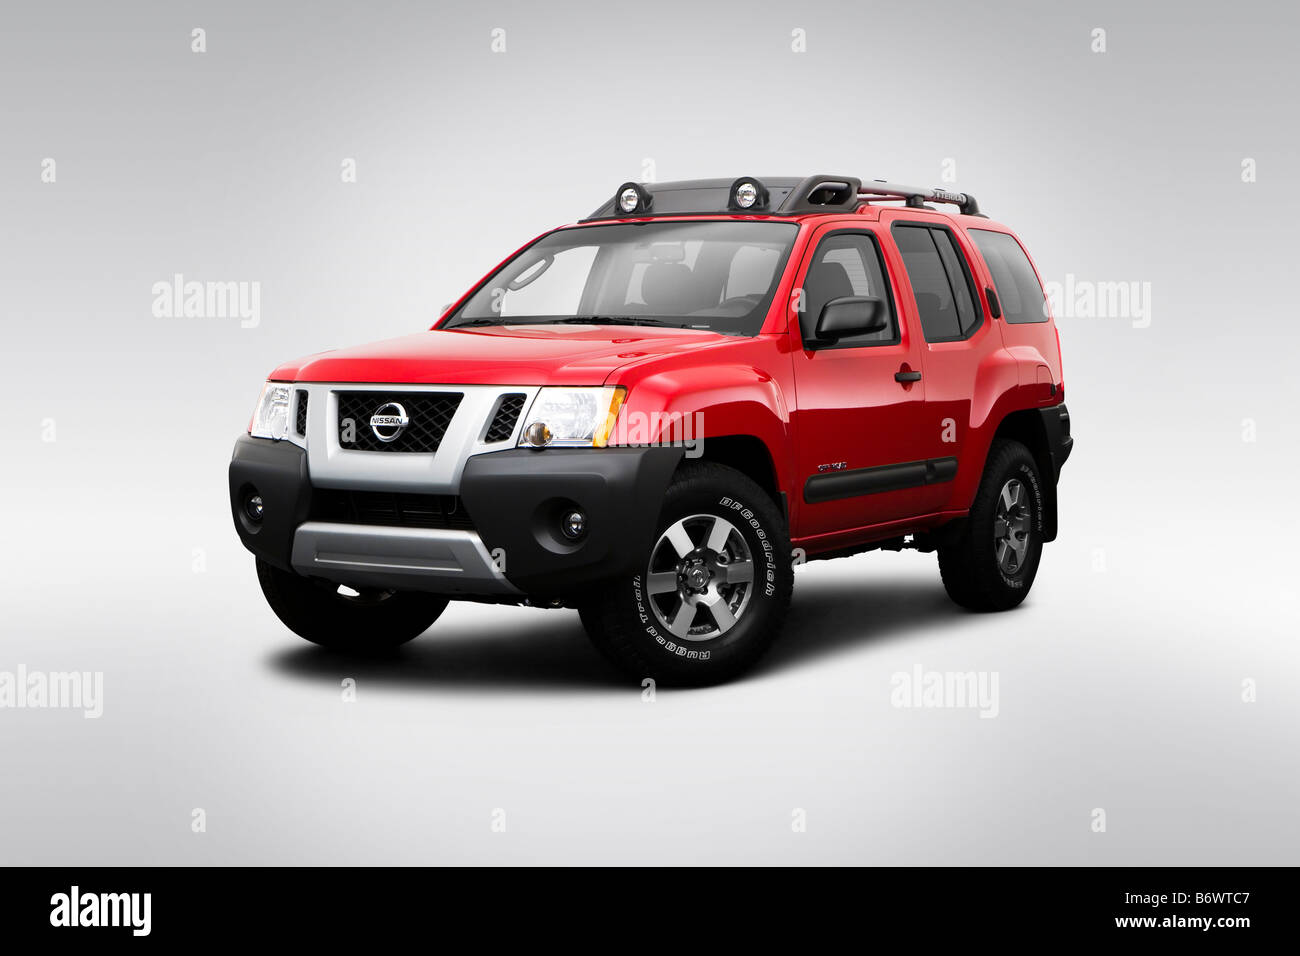 2009 Nissan Xterra in Red Front angle view Stock - Alamy